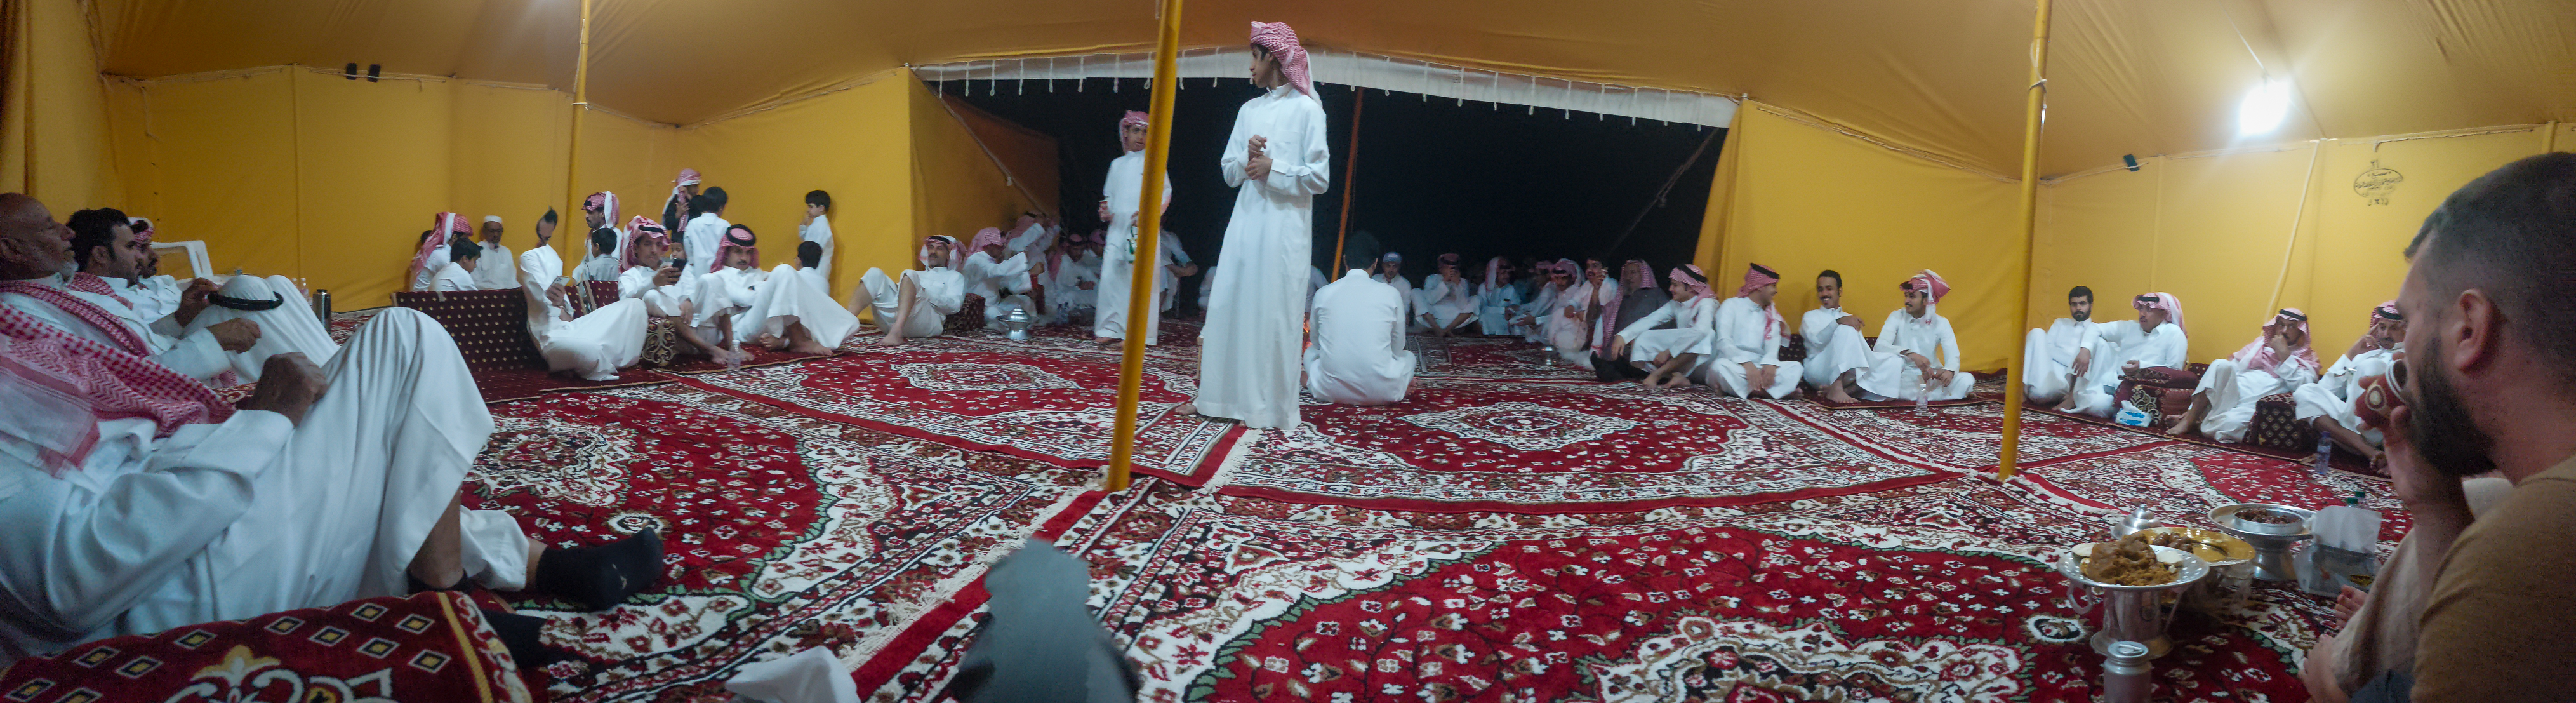 <span  class="uc_style_uc_tiles_grid_image_elementor_uc_items_attribute_title" style="color:#ffffff;">A Saudi family event...</span>